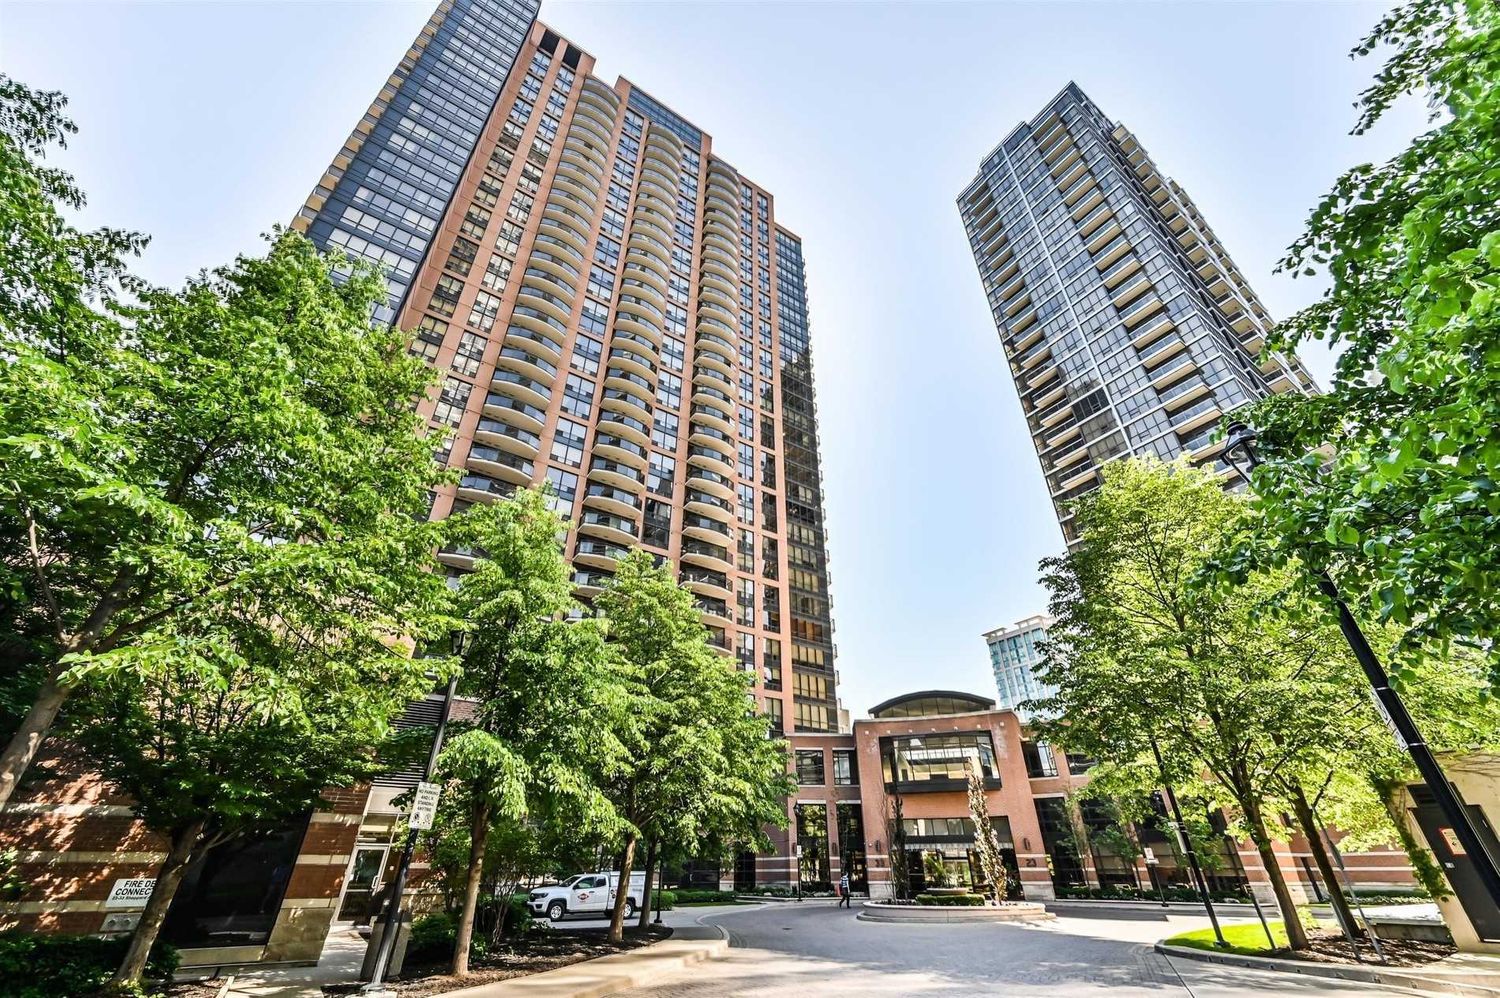 23 Sheppard Avenue E. Spring at Minto Gardens Condos is located in  North York, Toronto - image #2 of 3